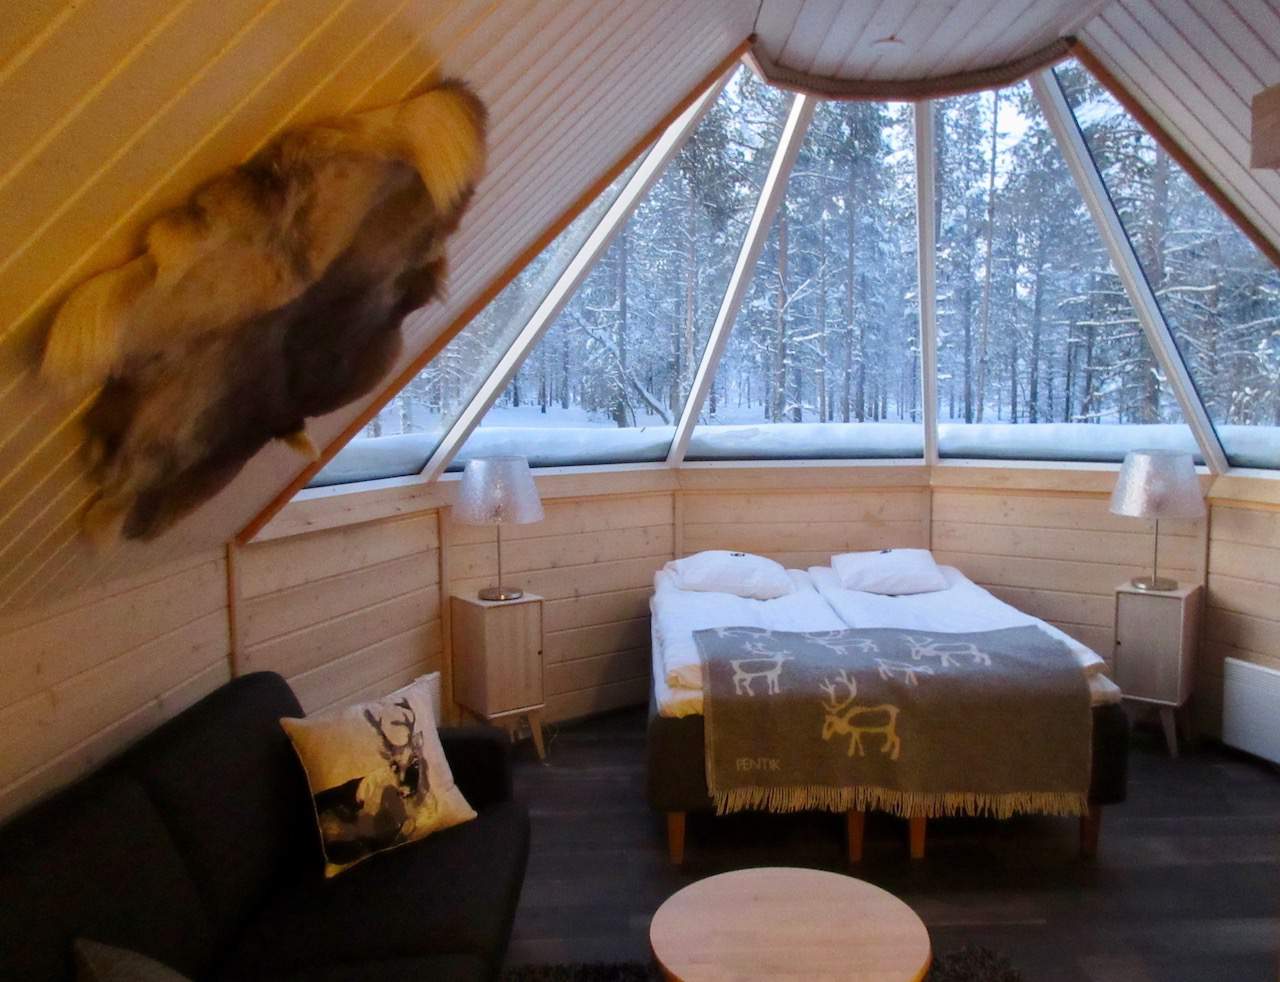 Spend a cosy night in an Aurora Cabin at the Northern Lights Village